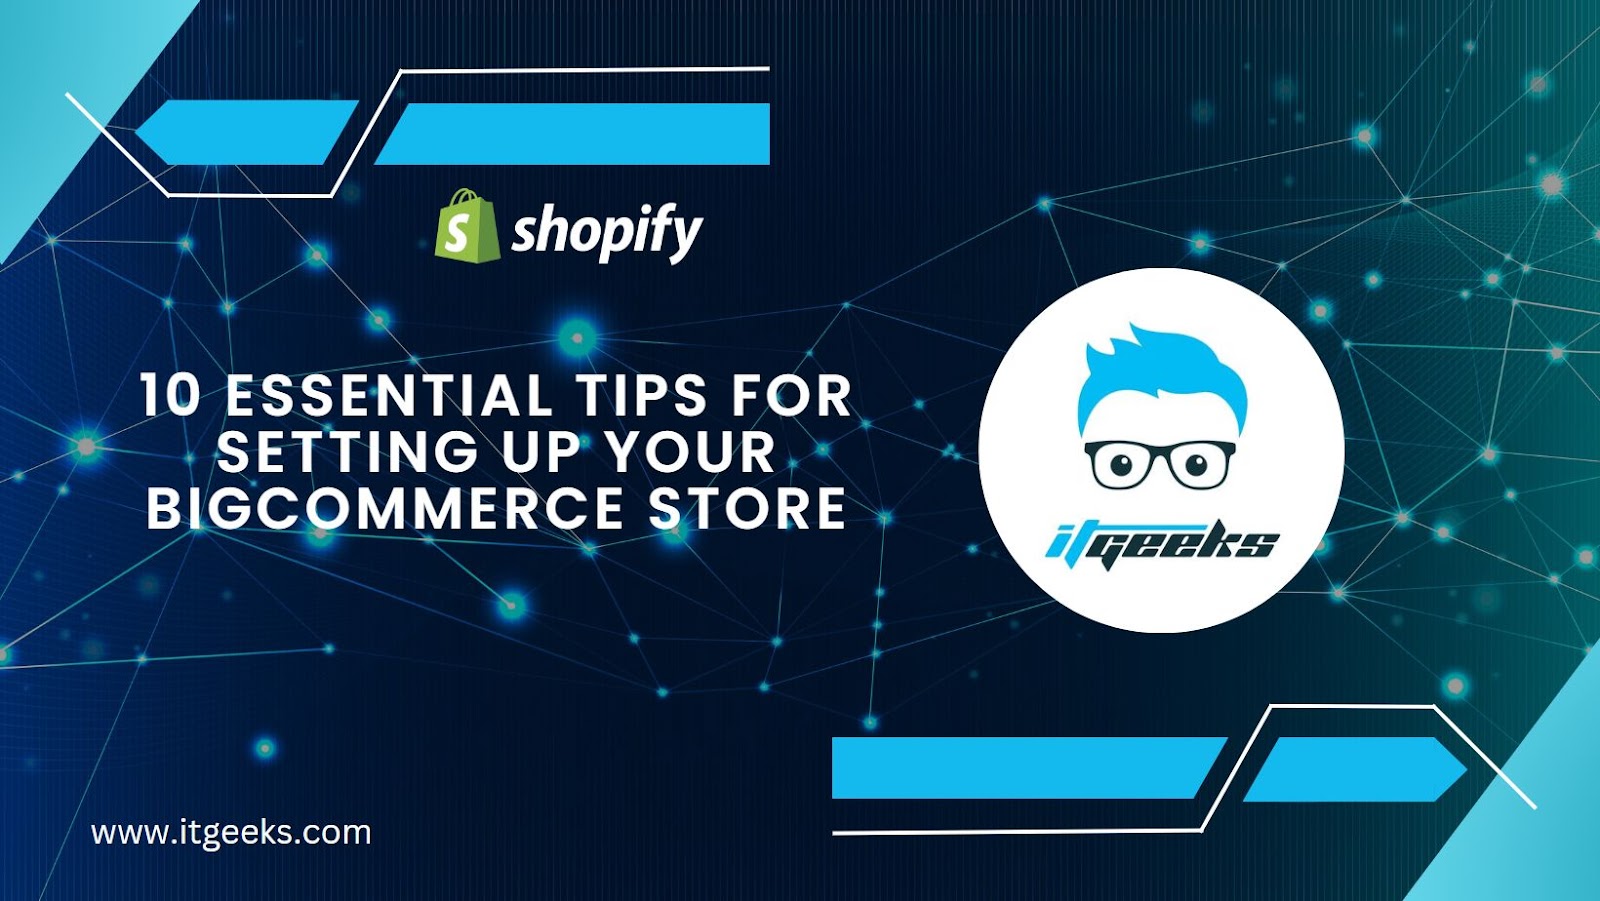 10-essential-tips-for-setting-up-your-bigcommerce-store